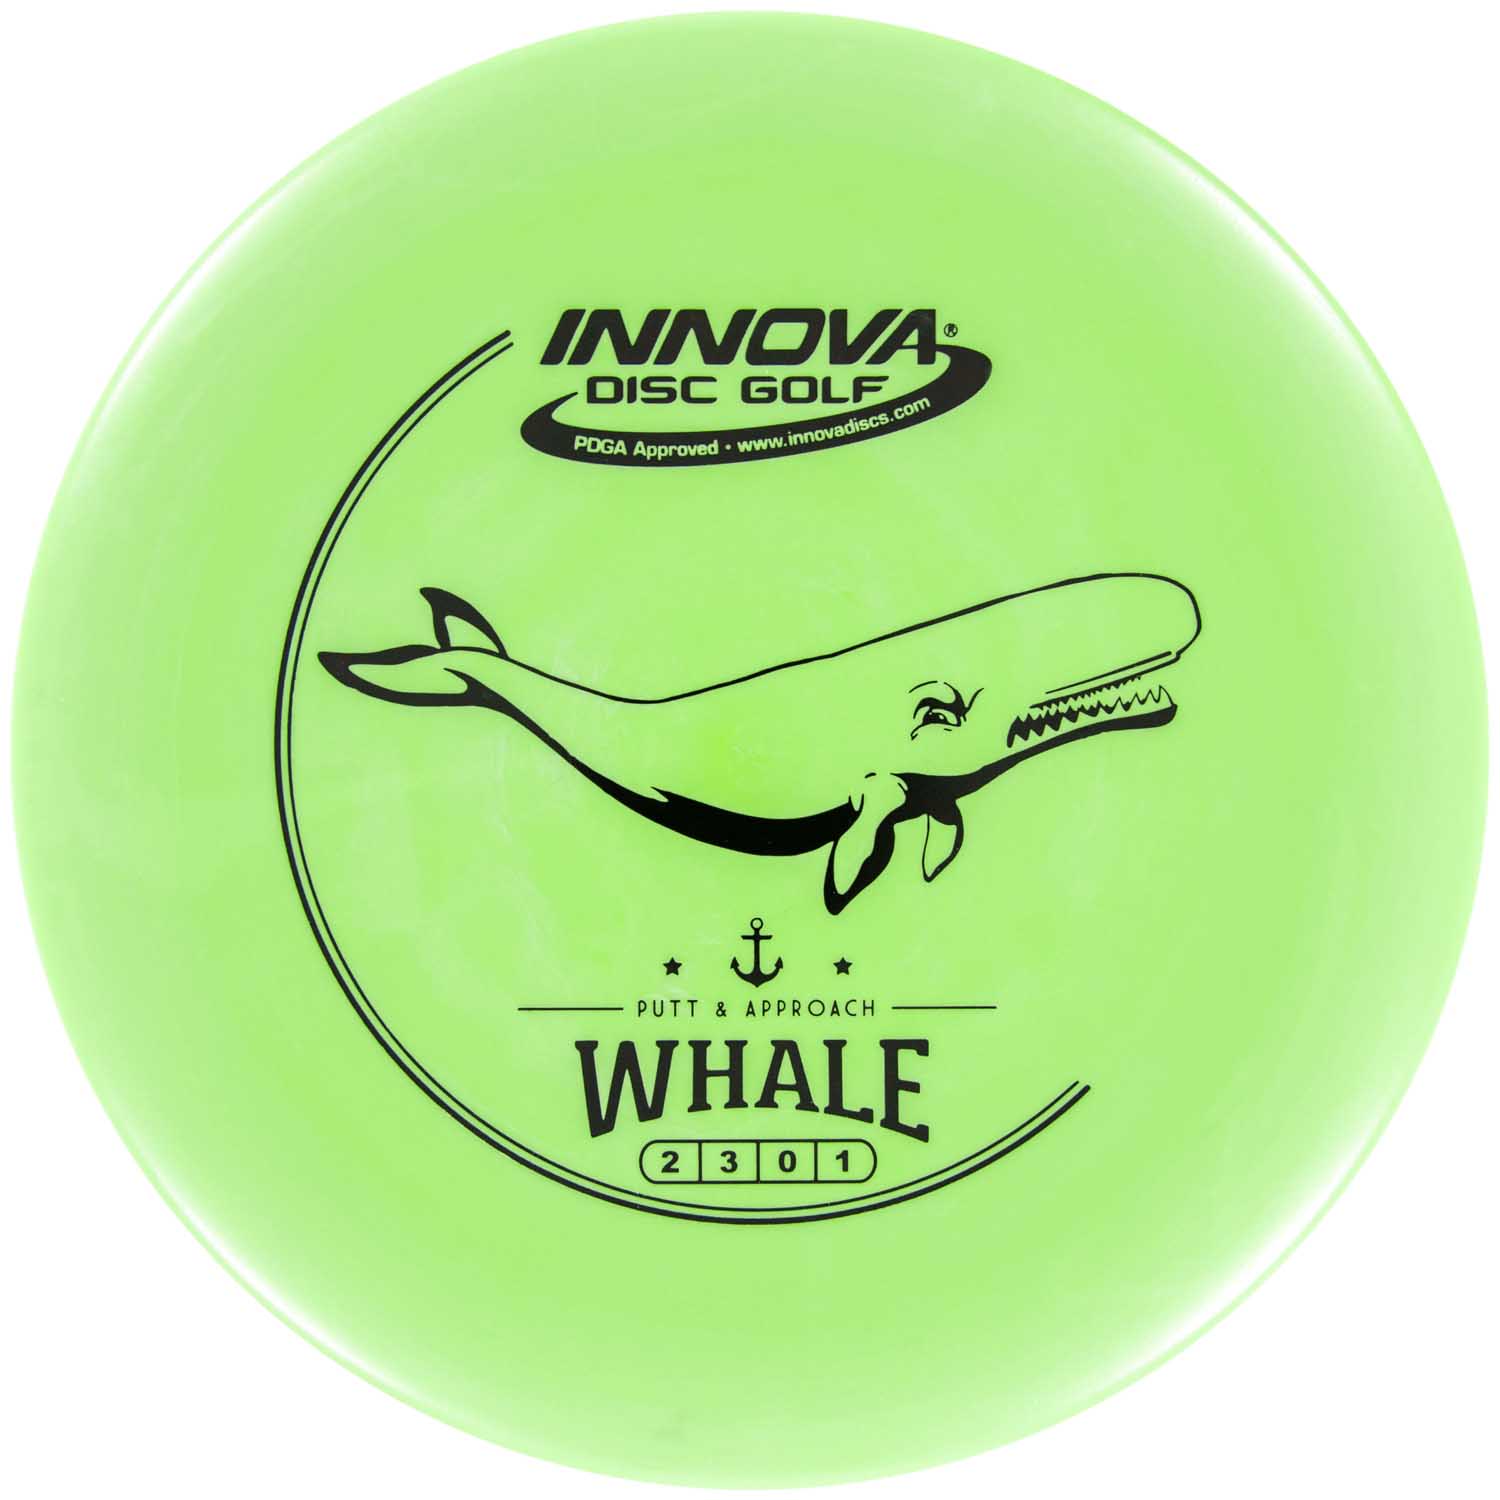 DX Whale from Disc Golf United